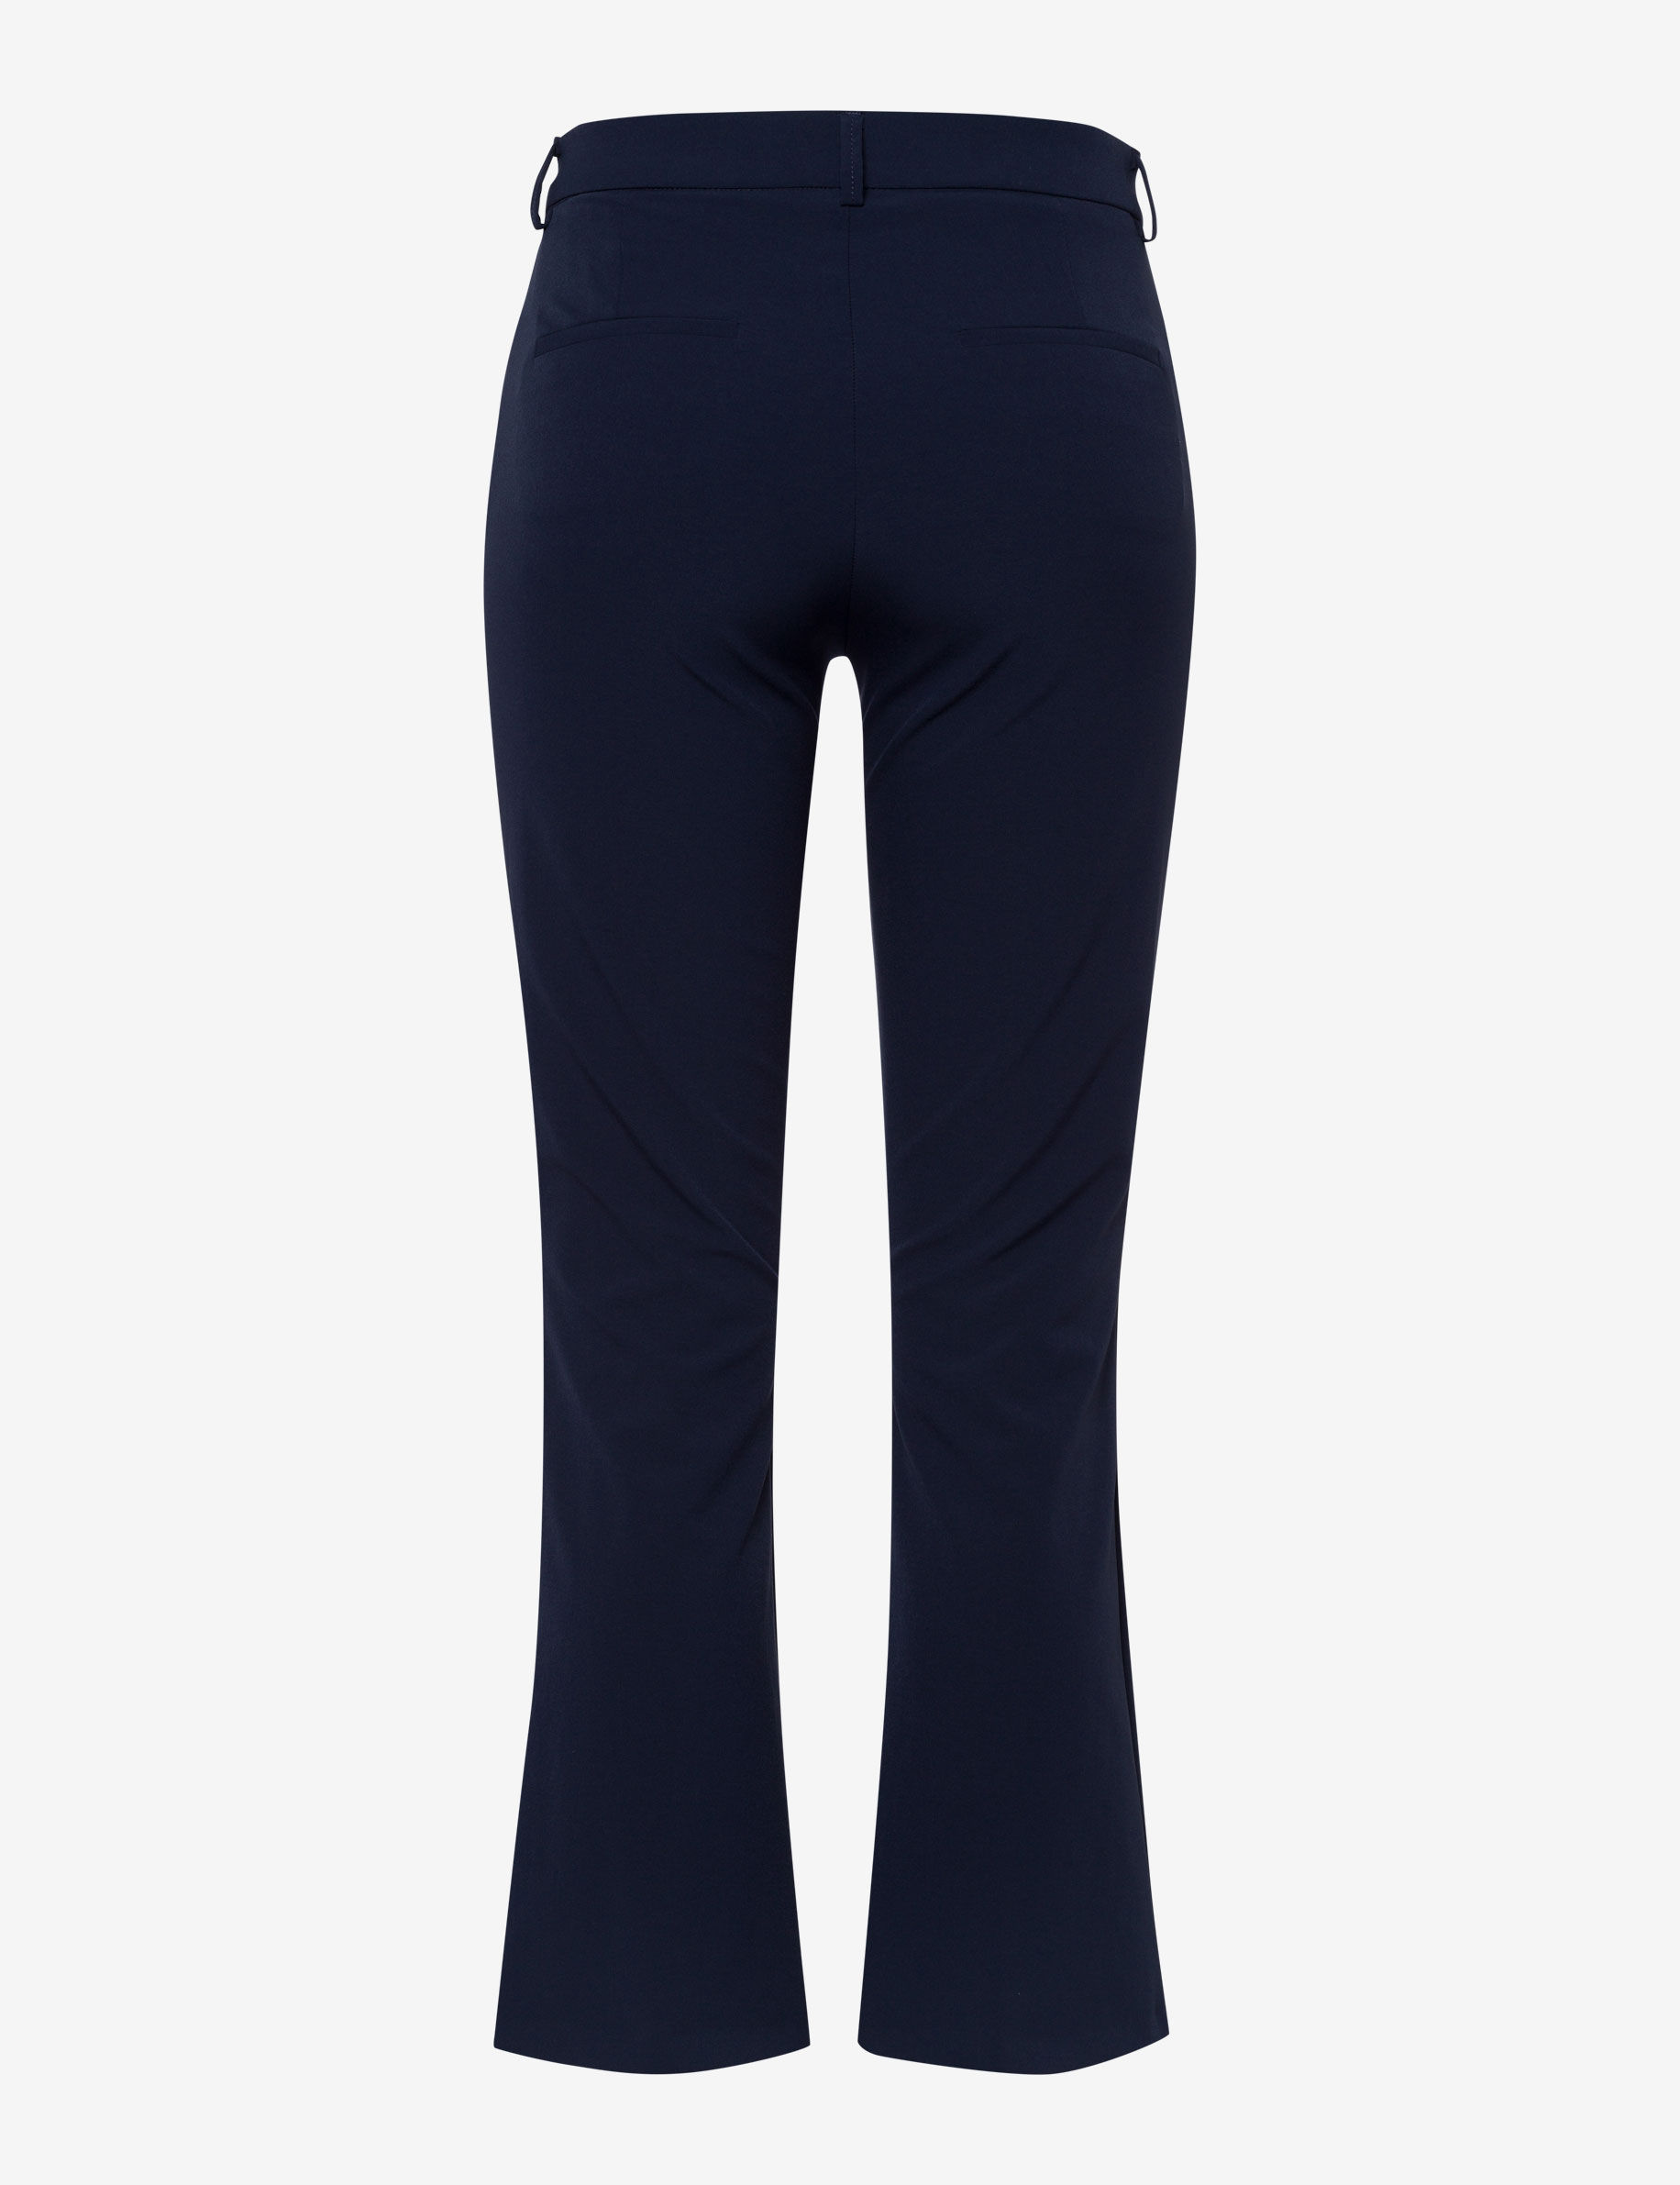 Women Style SHAKIRA S NAVY Slim Fit Stand-alone rear view